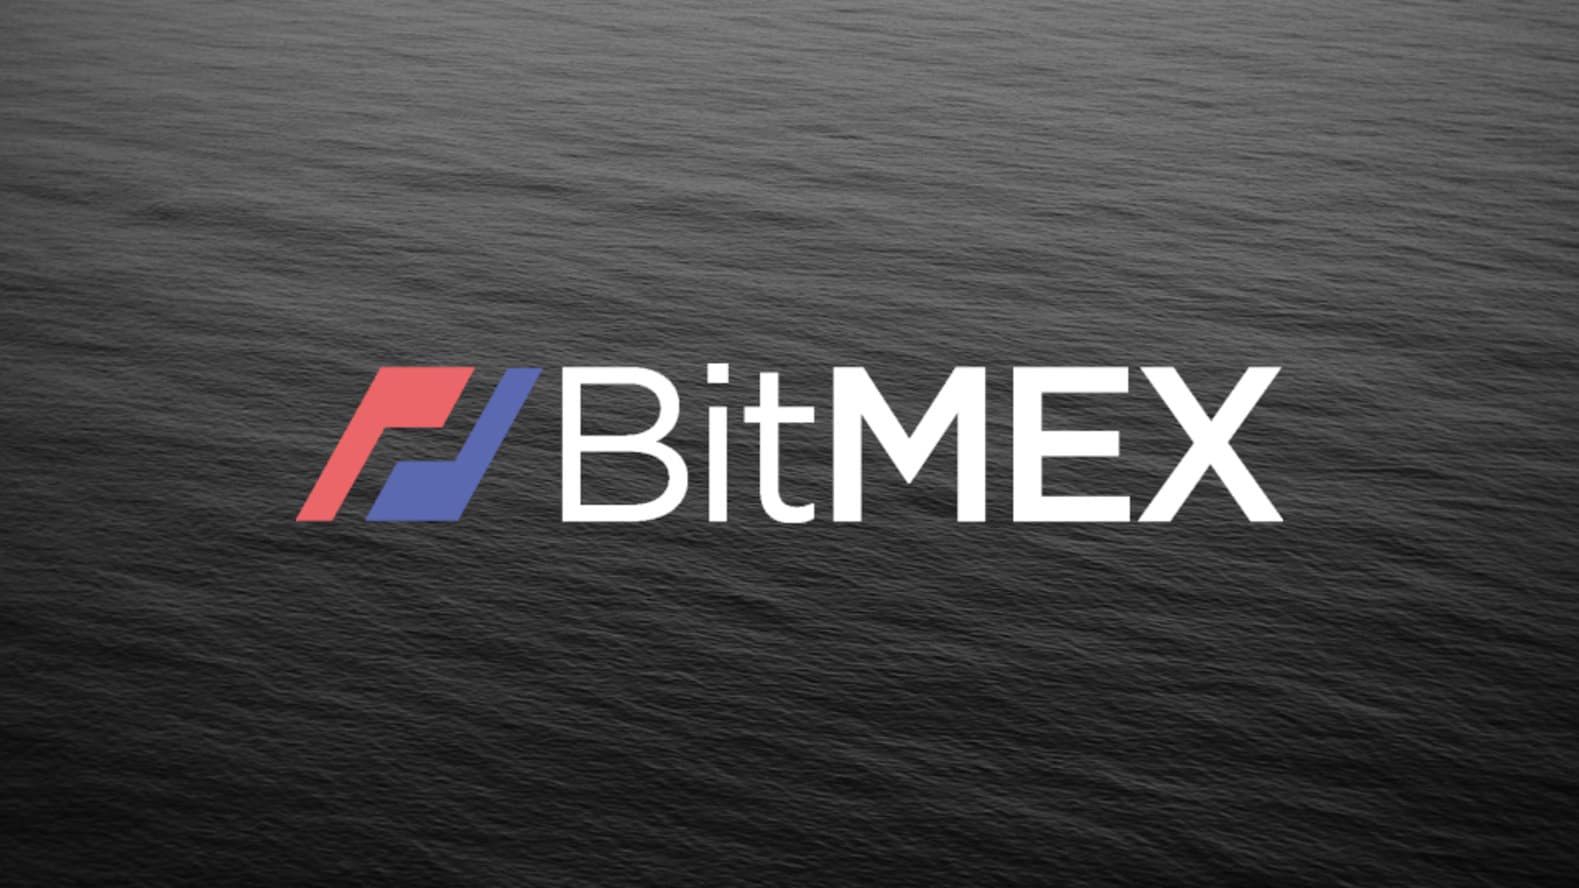 Giant Grant From BitMEX To Smart Contract Developer!